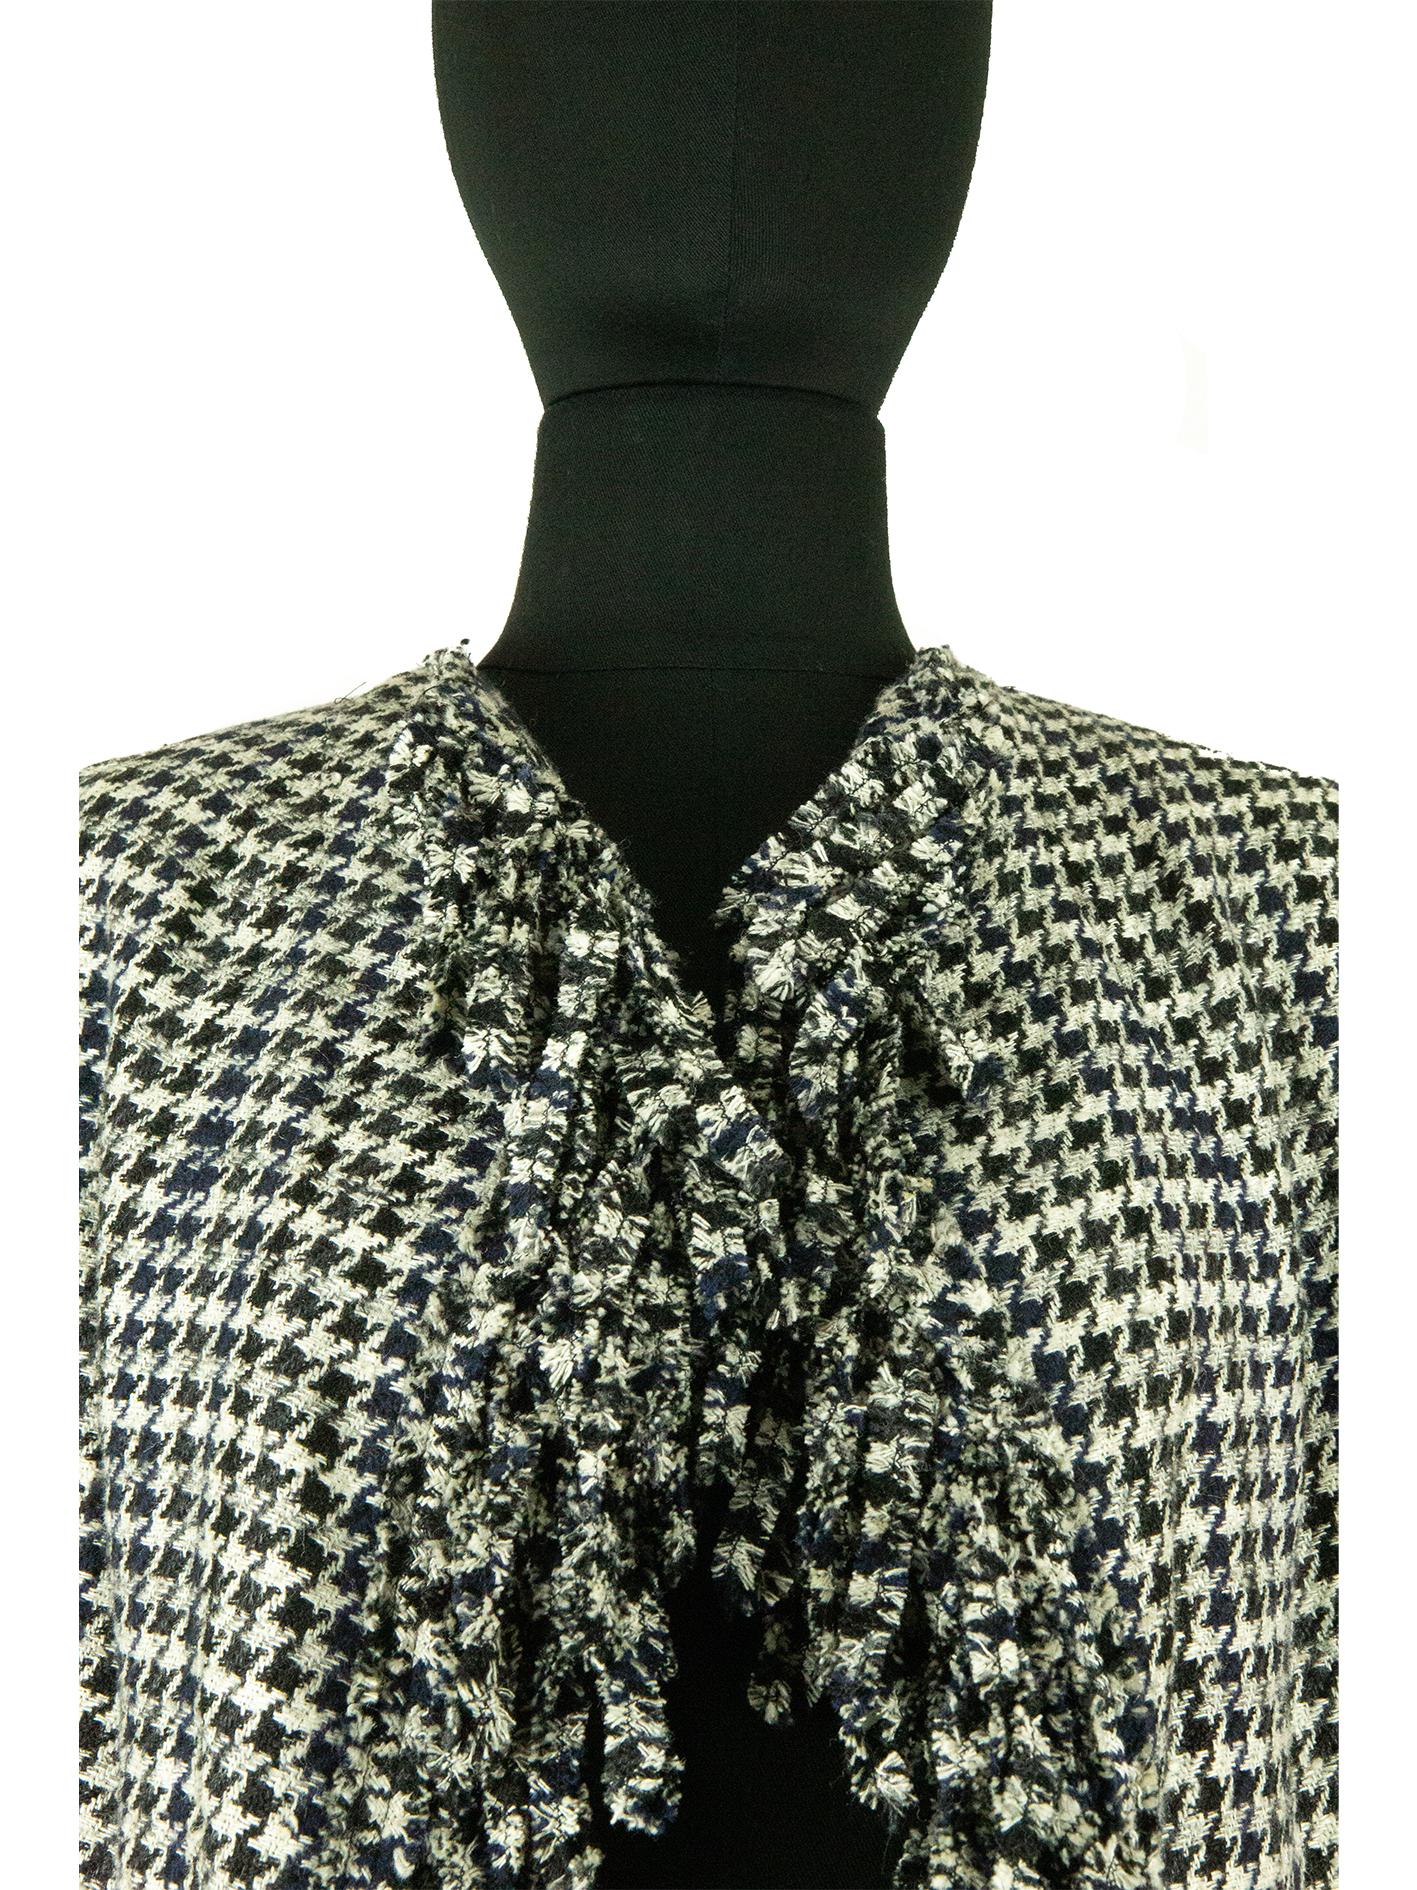 From the Chanel collection of spring 2007, comes this unique black and white dogtooth jacket. The bodice is loose fitting and cut on the bias, to give the two fronts of the jacket a draped feeling, as they fall into one another. There is also frayed